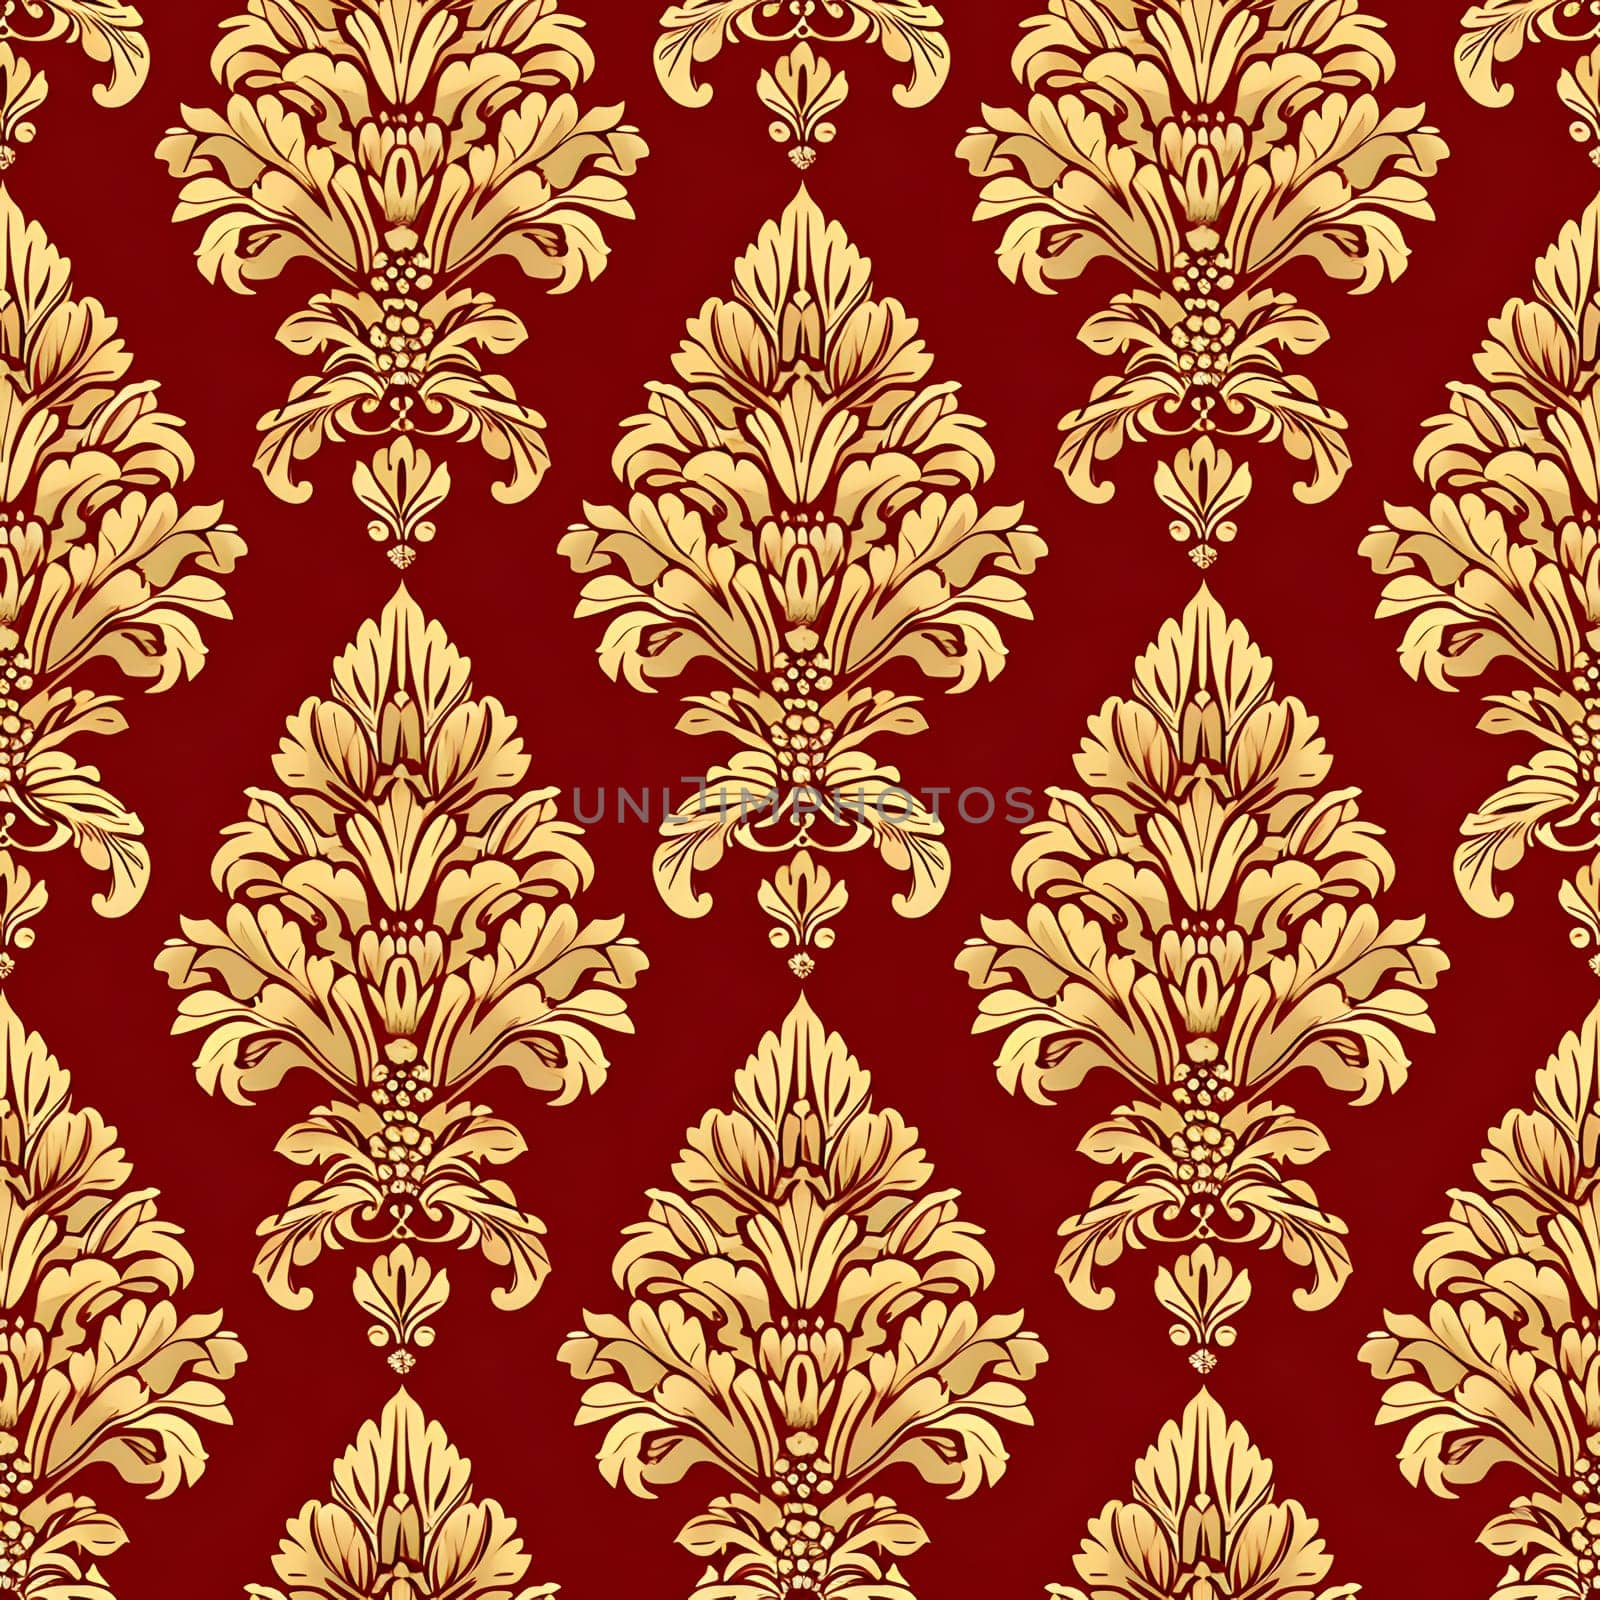 Seamless texture of red and gold damask pattern. Neural network generated image. Not based on any actual scene or pattern.